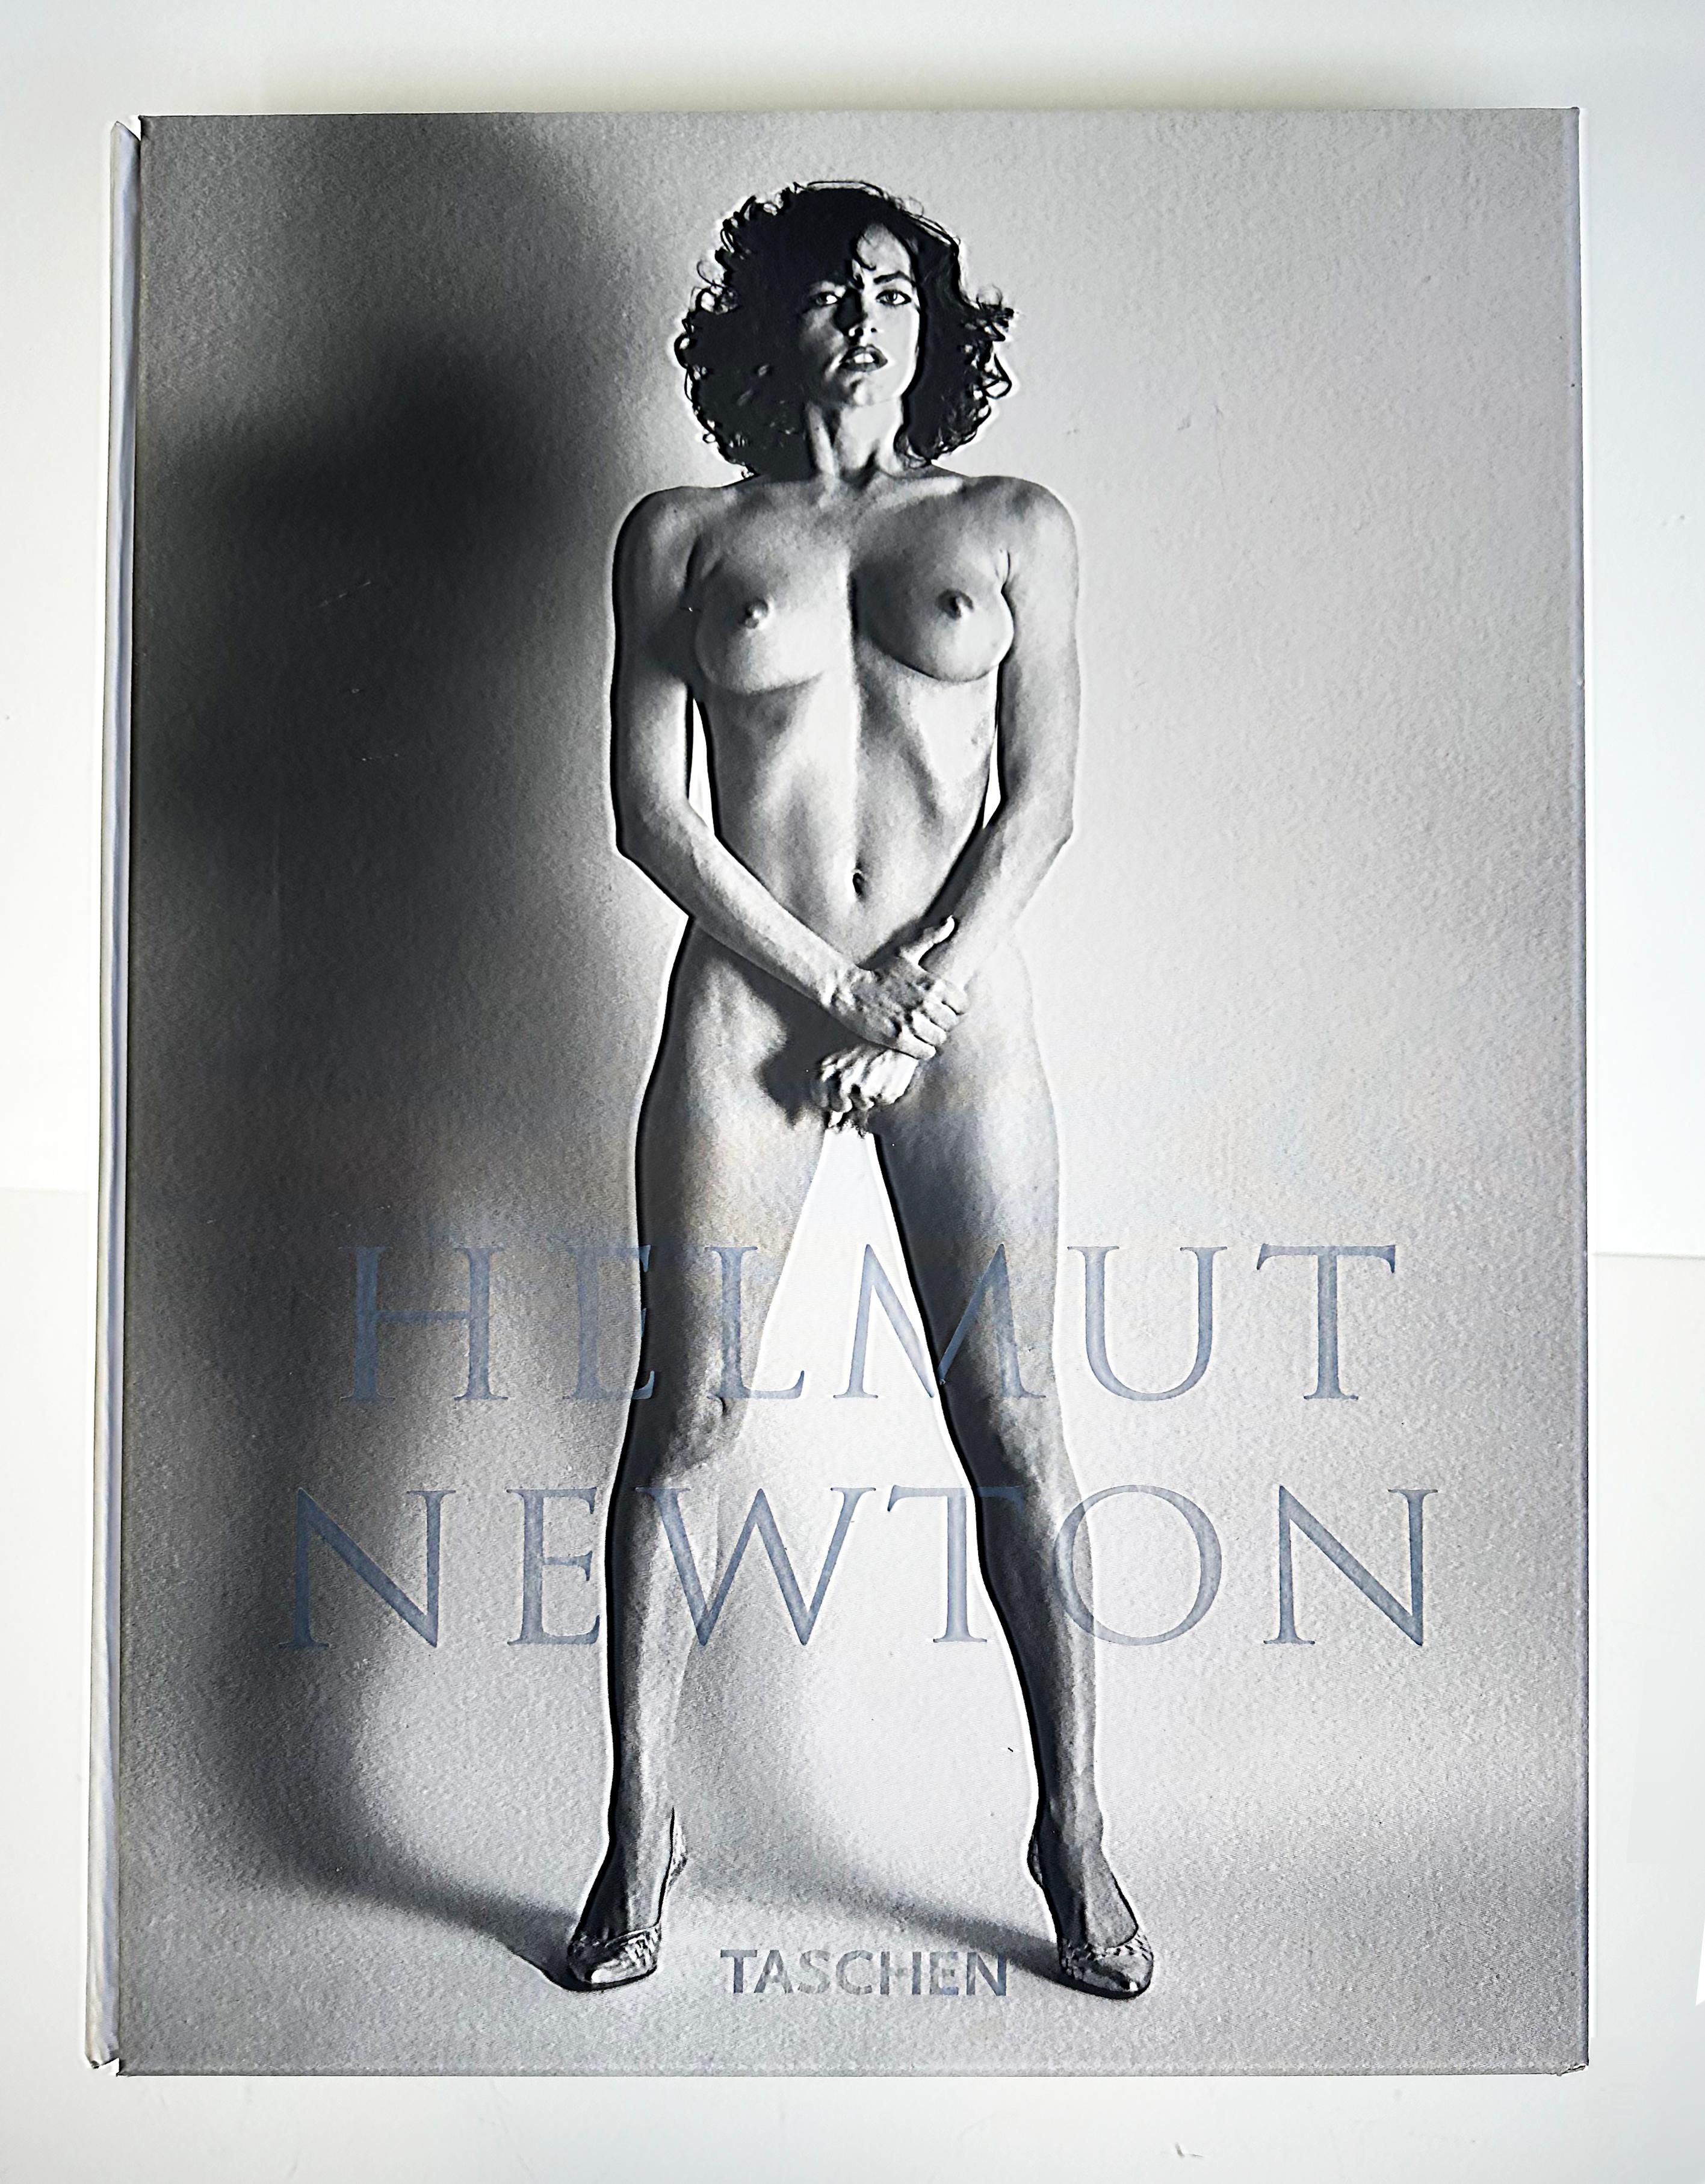 Helmut Newton Sumo Taschen Book, Philippe Starck Stand, Signed Limited Edition

Offered for sale is a Helmut Newton Limited Edition Sumo book published by Taschen with a custom-designed stand by Philippe Starck. There is an unparalleled grandeur of